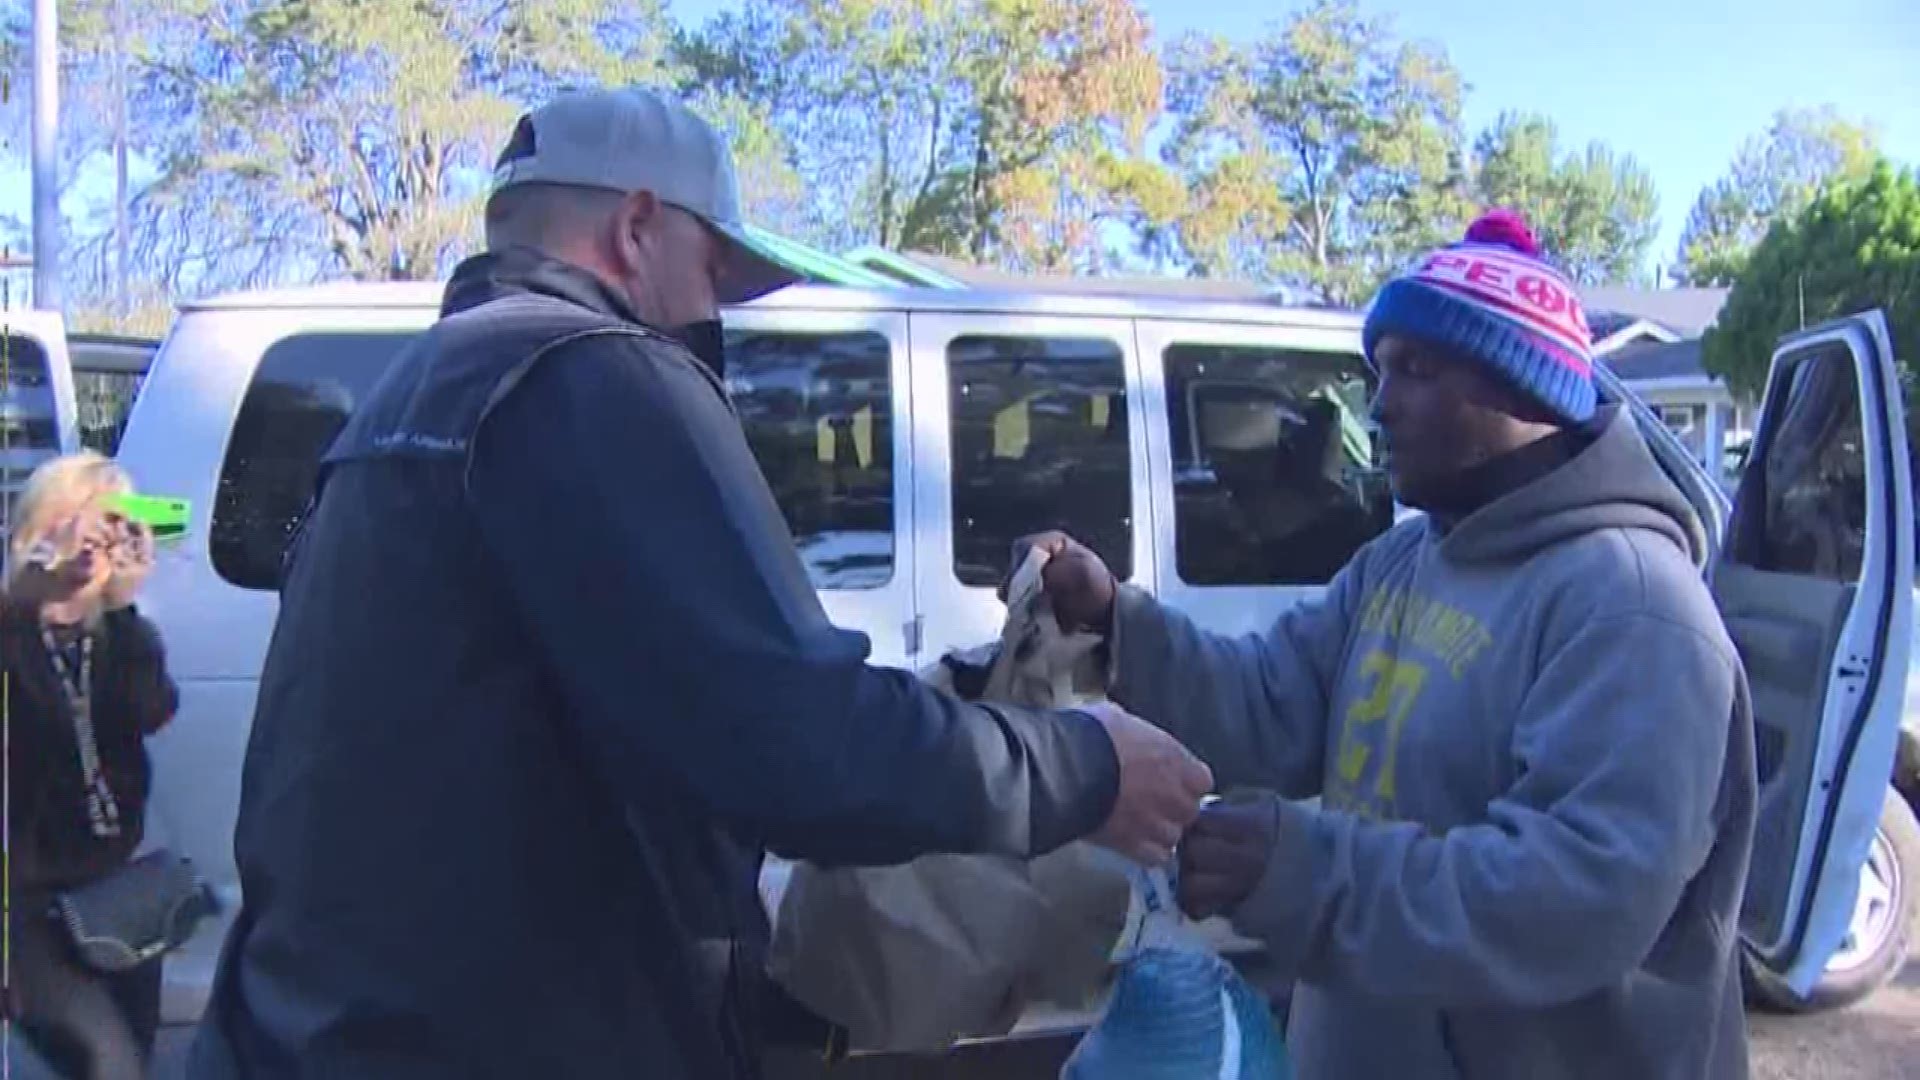 Baseball great Roger Clemens and his family teamed up with local nonprofit Kids' Meals to bring turkeys and Thanksgiving dinner to families in need.